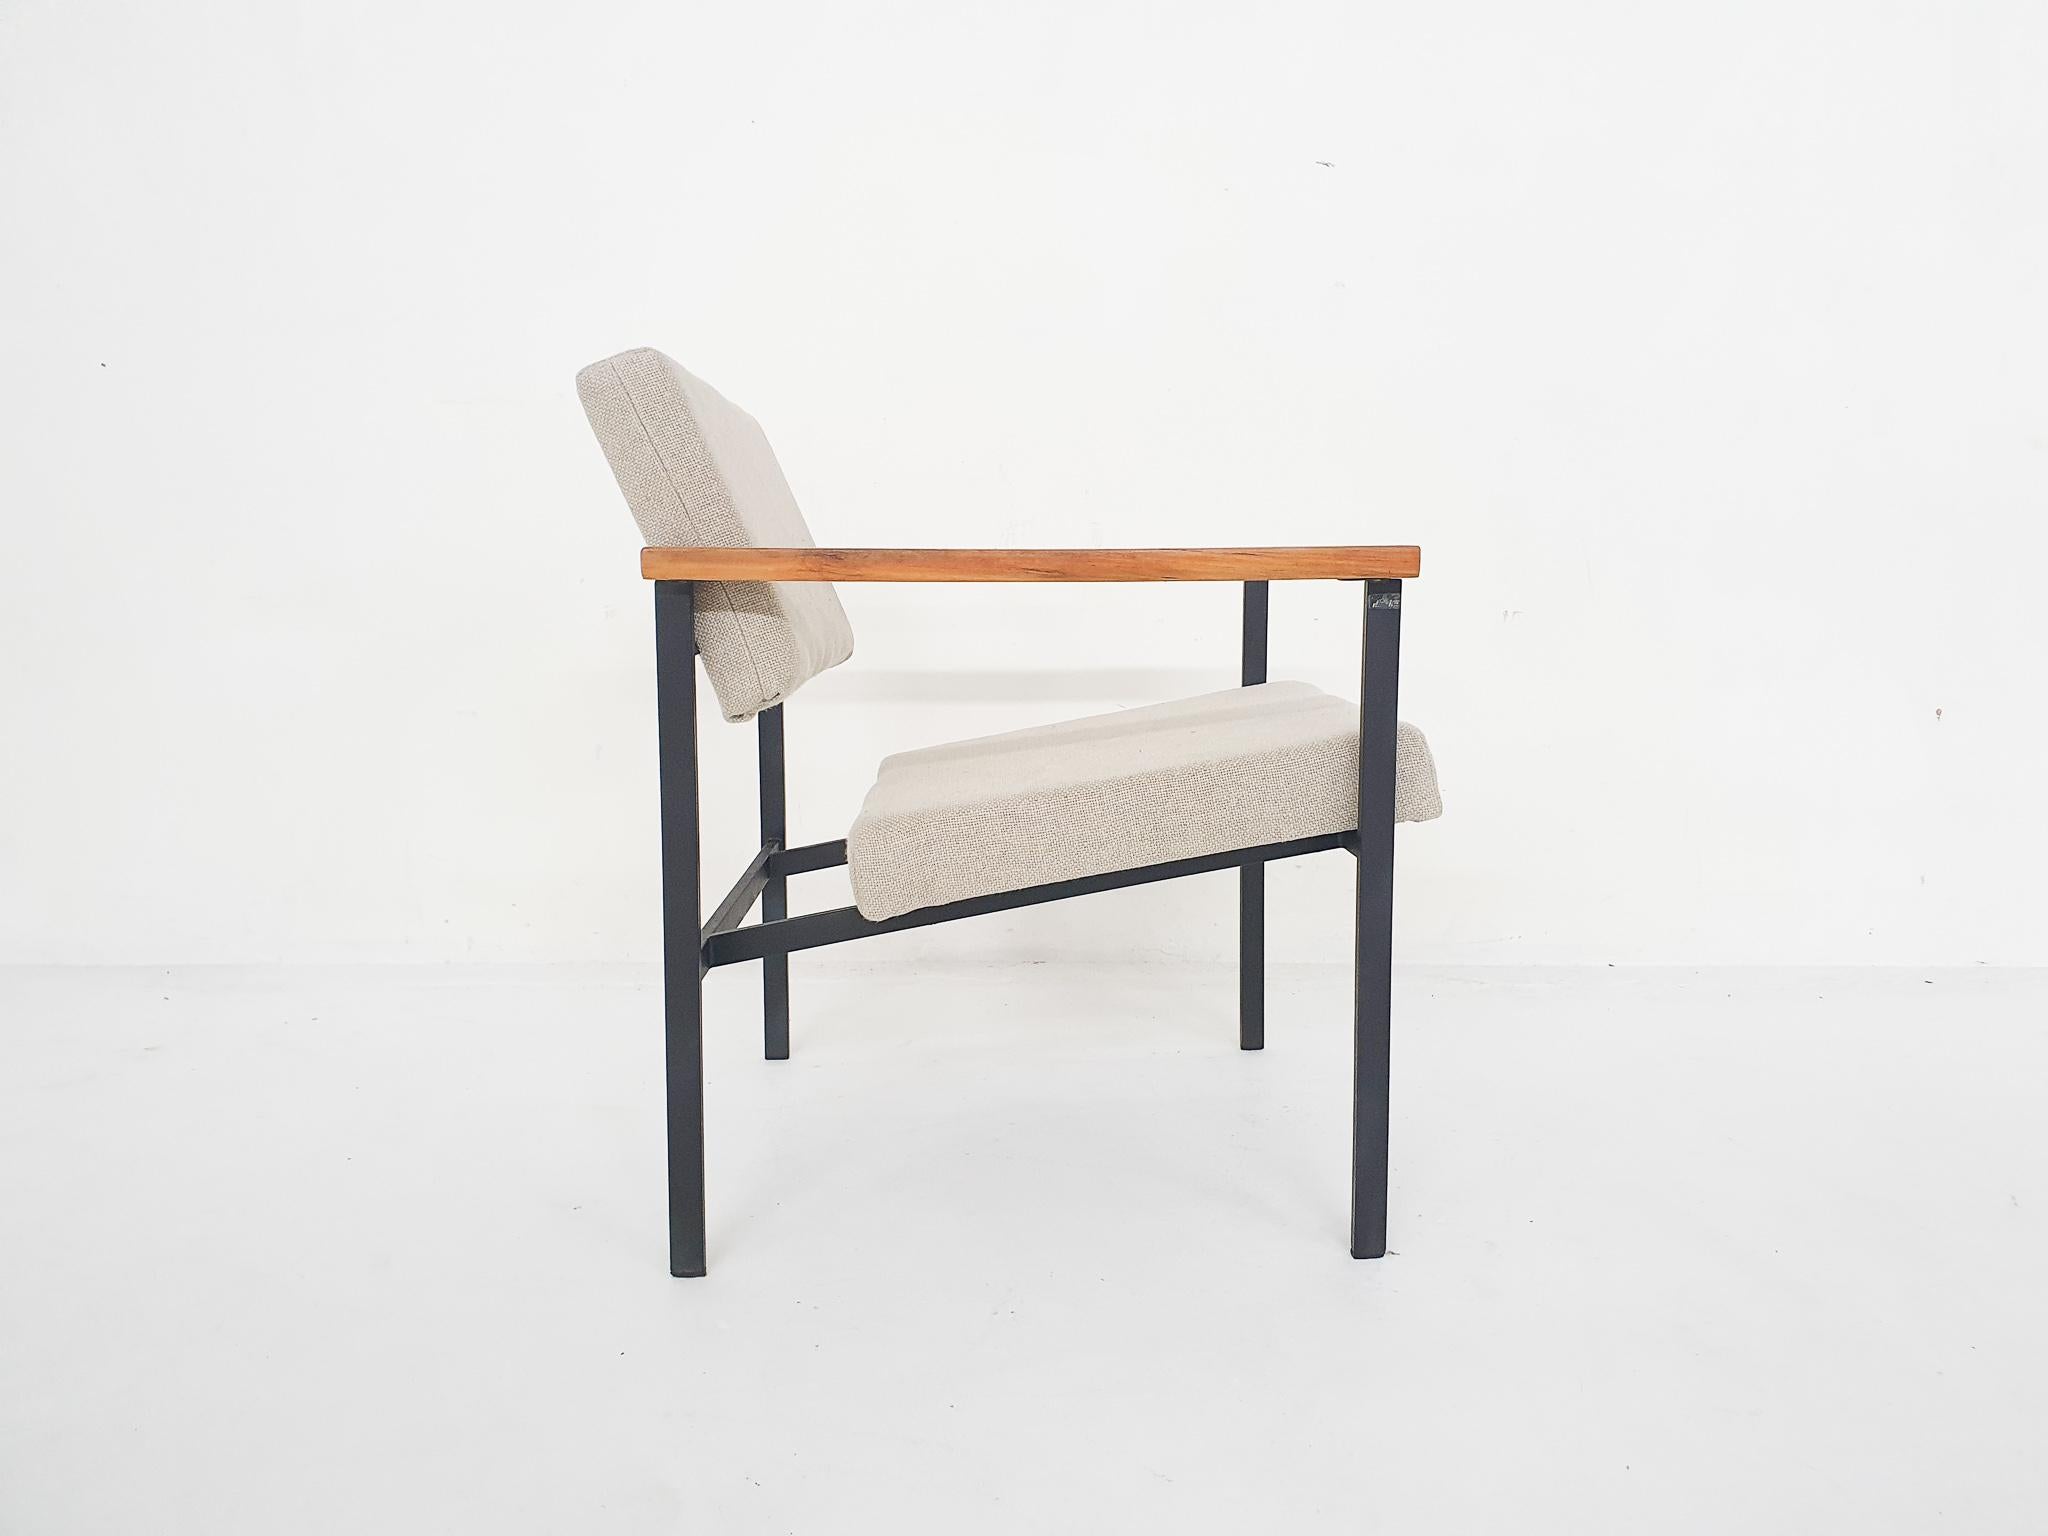 20th Century Minimalistic lounge chair by Marko, The Netherlands, 1960's